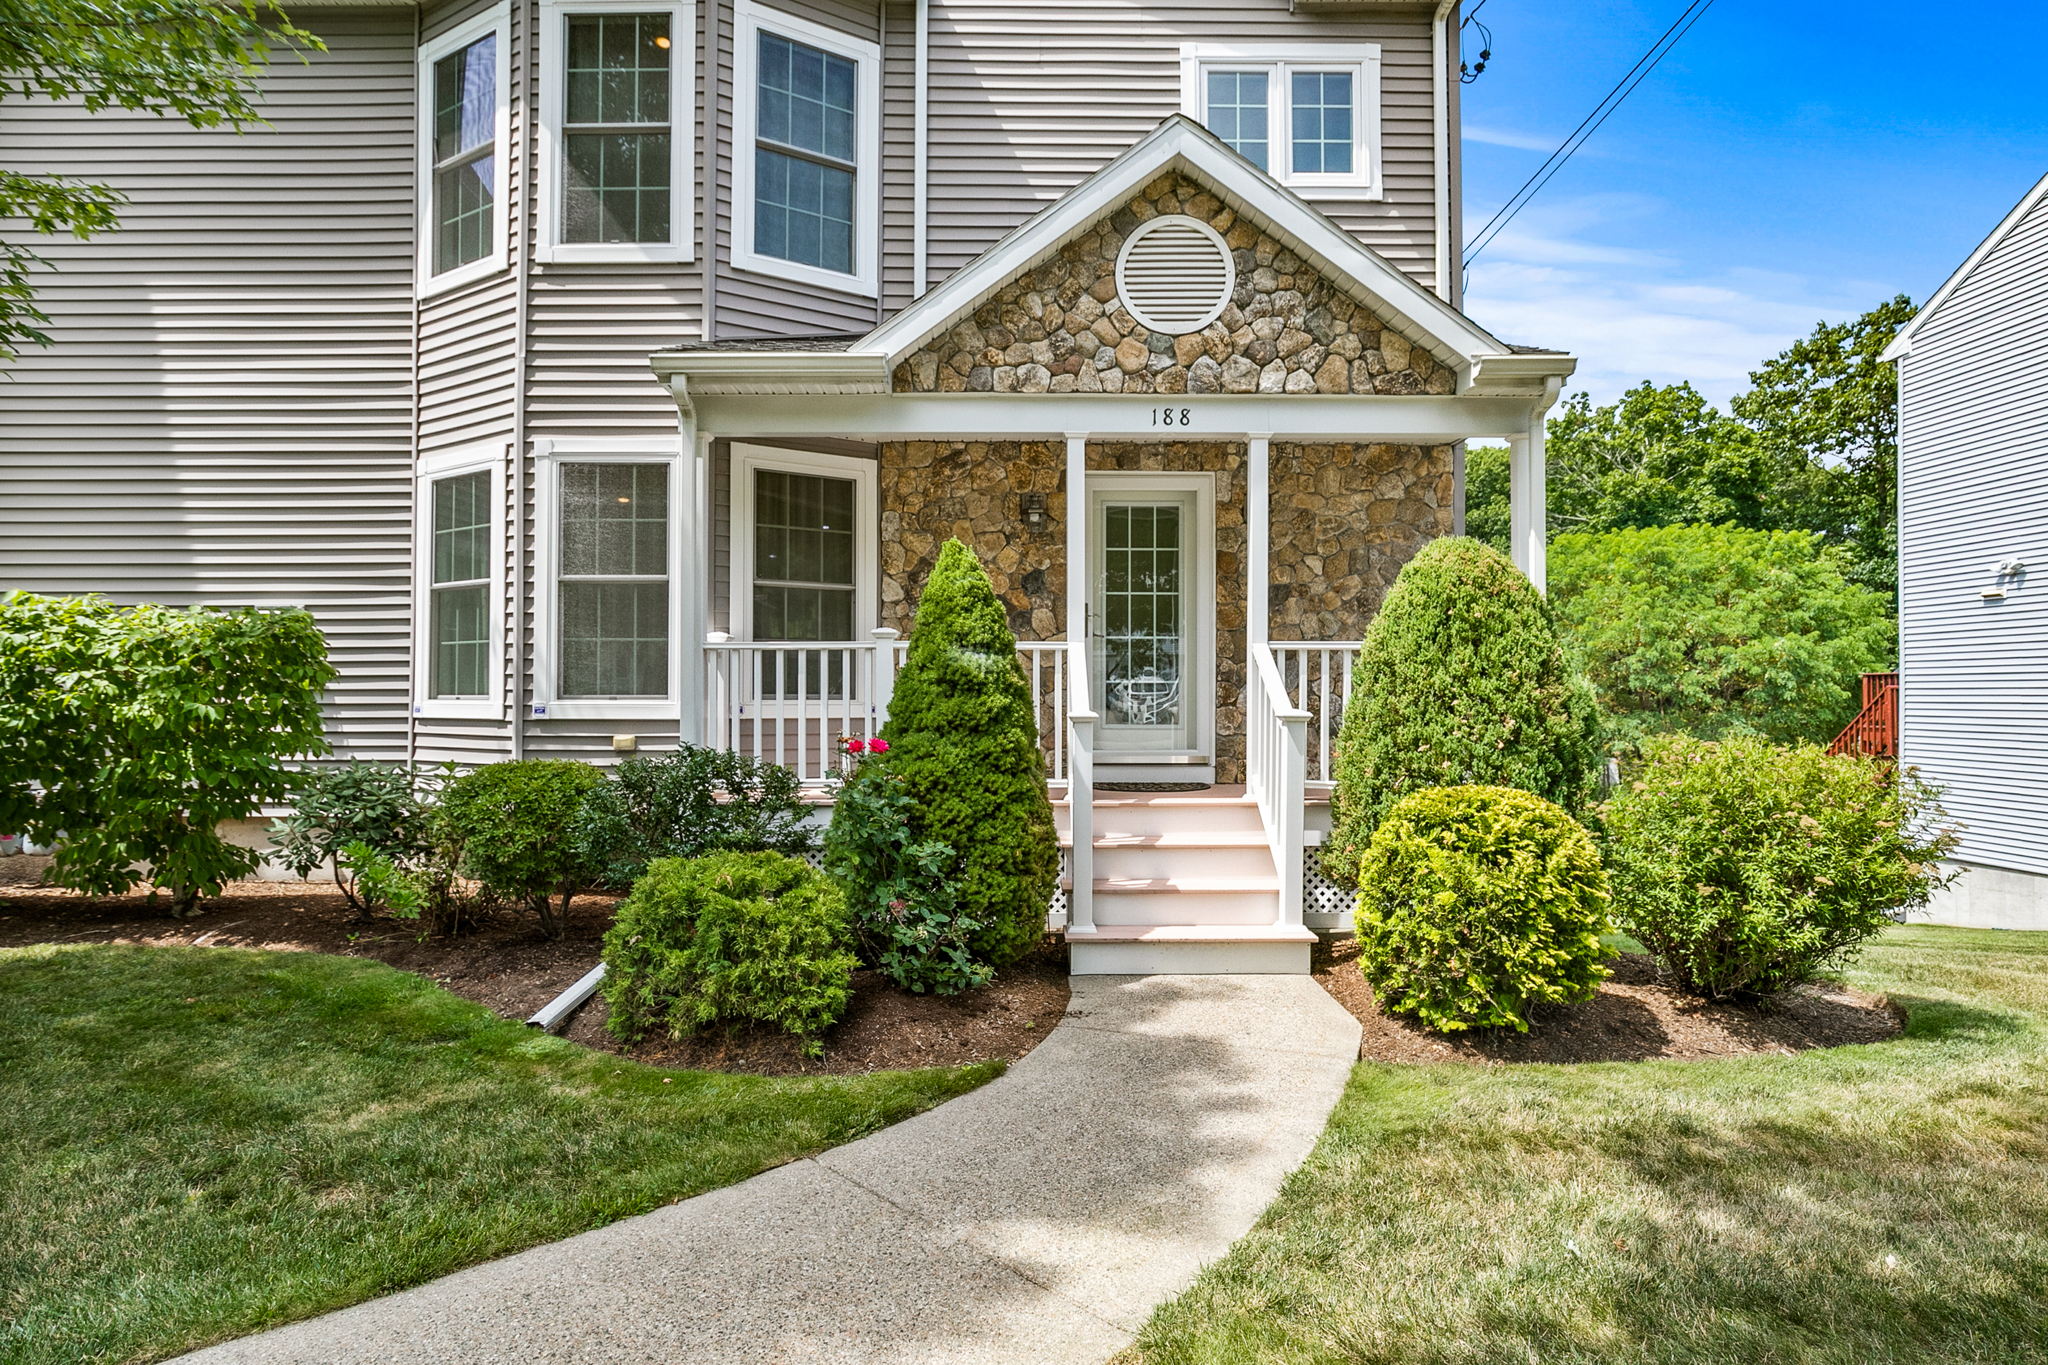 Natick Single Family Just Listed!